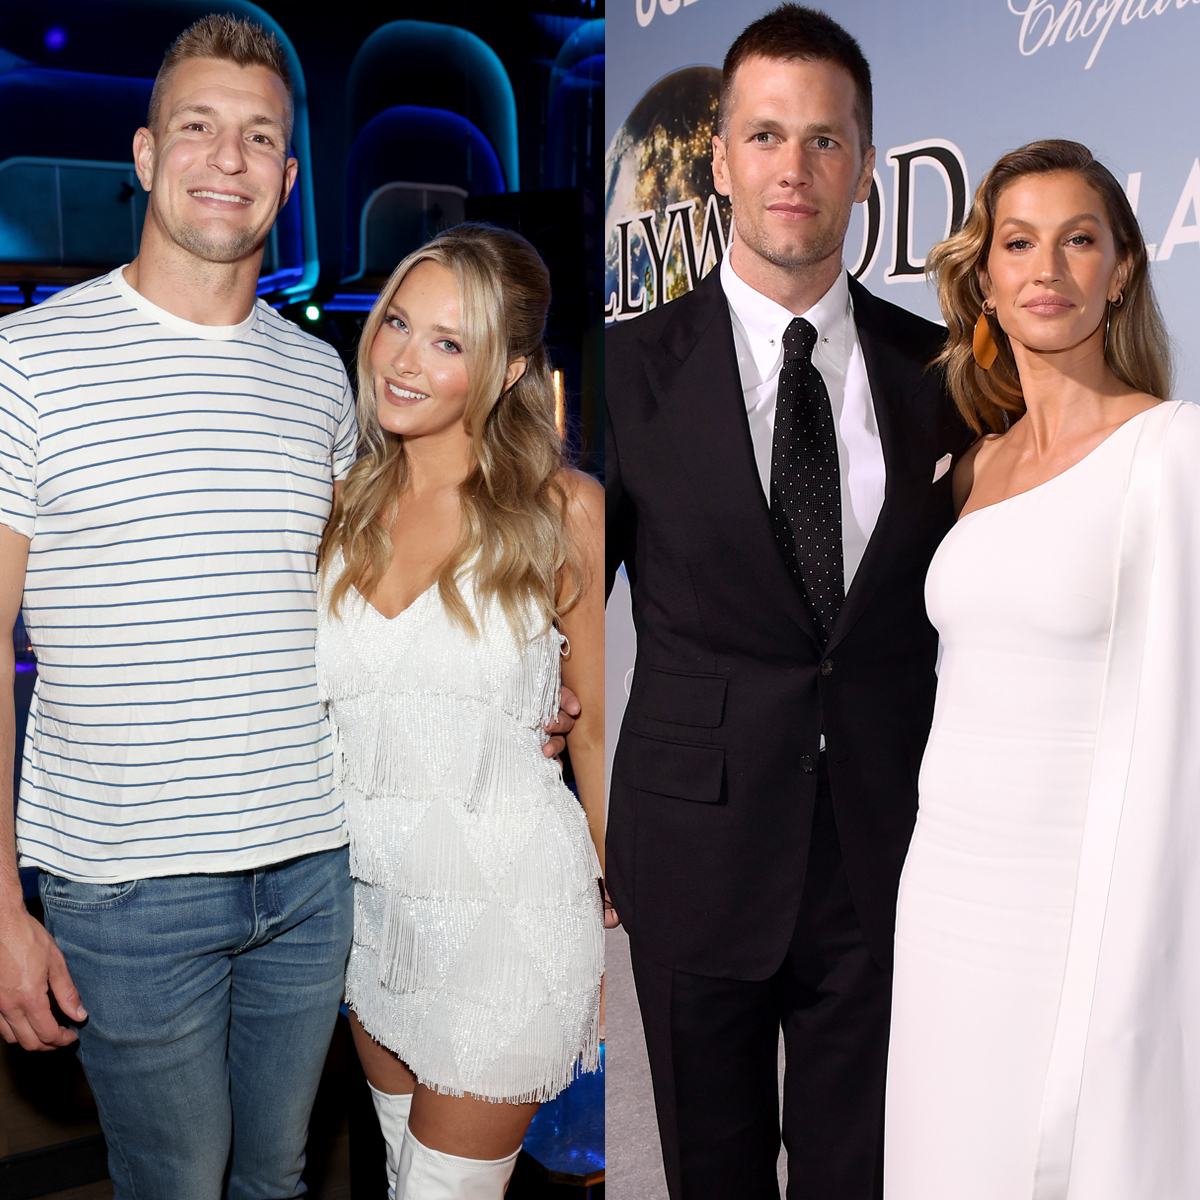 Rob Gronkowski's Girlfriend Camille Kostek Comments on Tom and Gisele